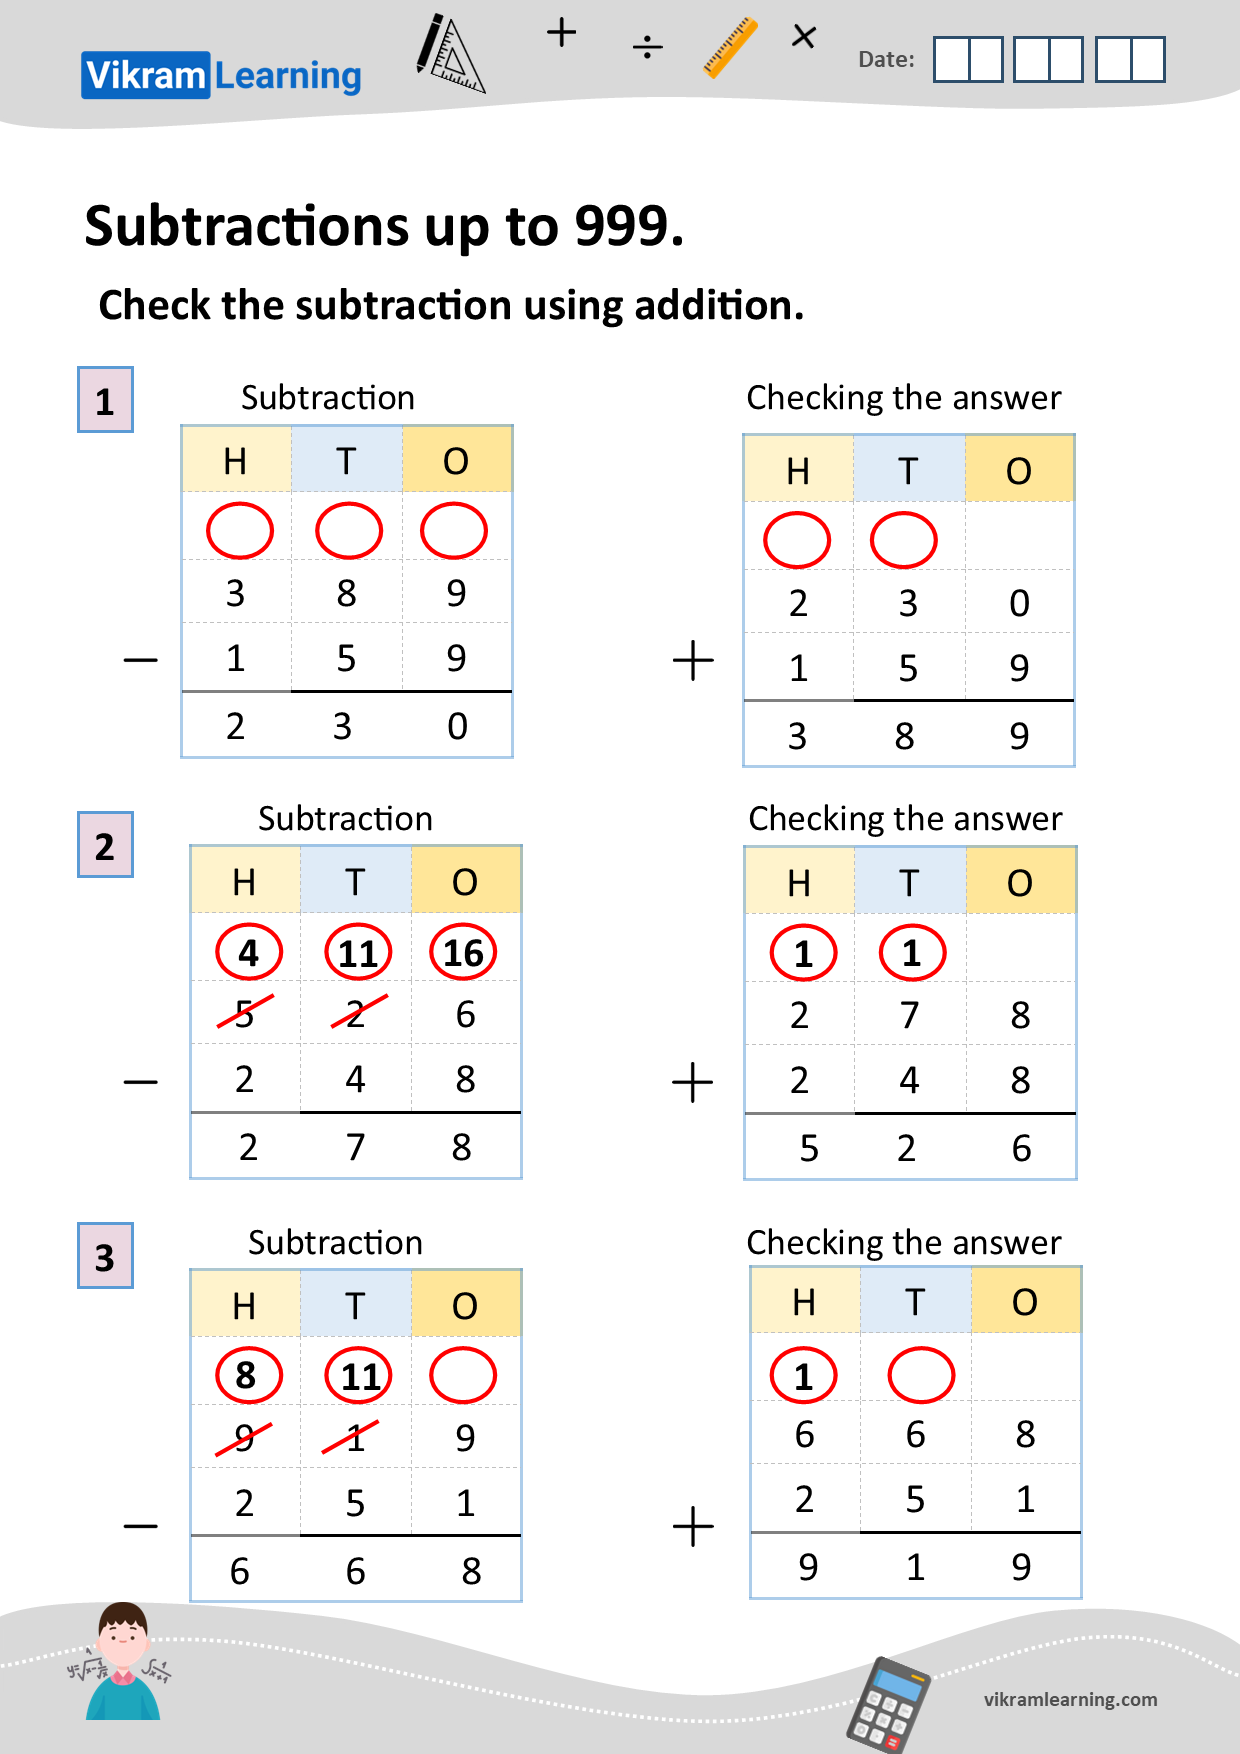 Download subtractions up to 999 worksheets